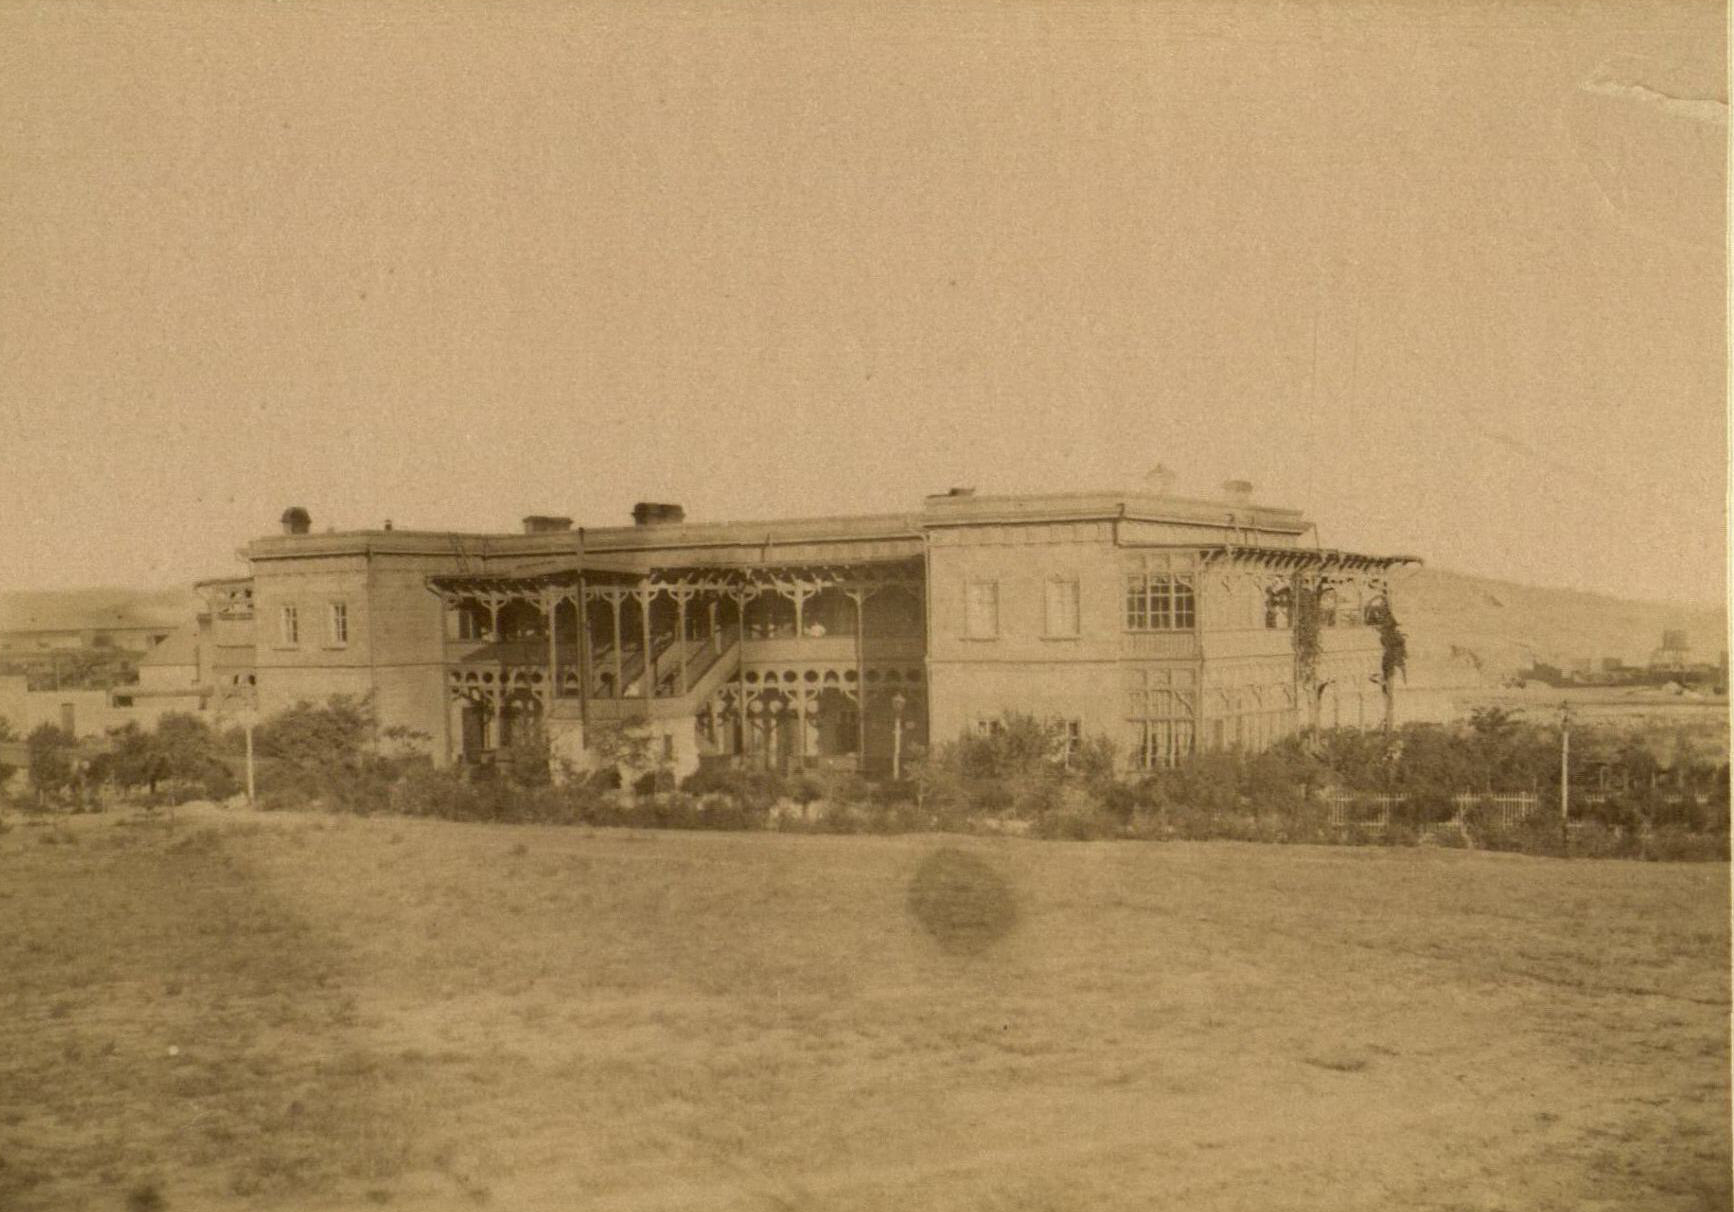 At the end of the 19th century, Ludvig Nobel had Villa Petrolea built, an oasis for the Scandinavian salaried employees in Baku.